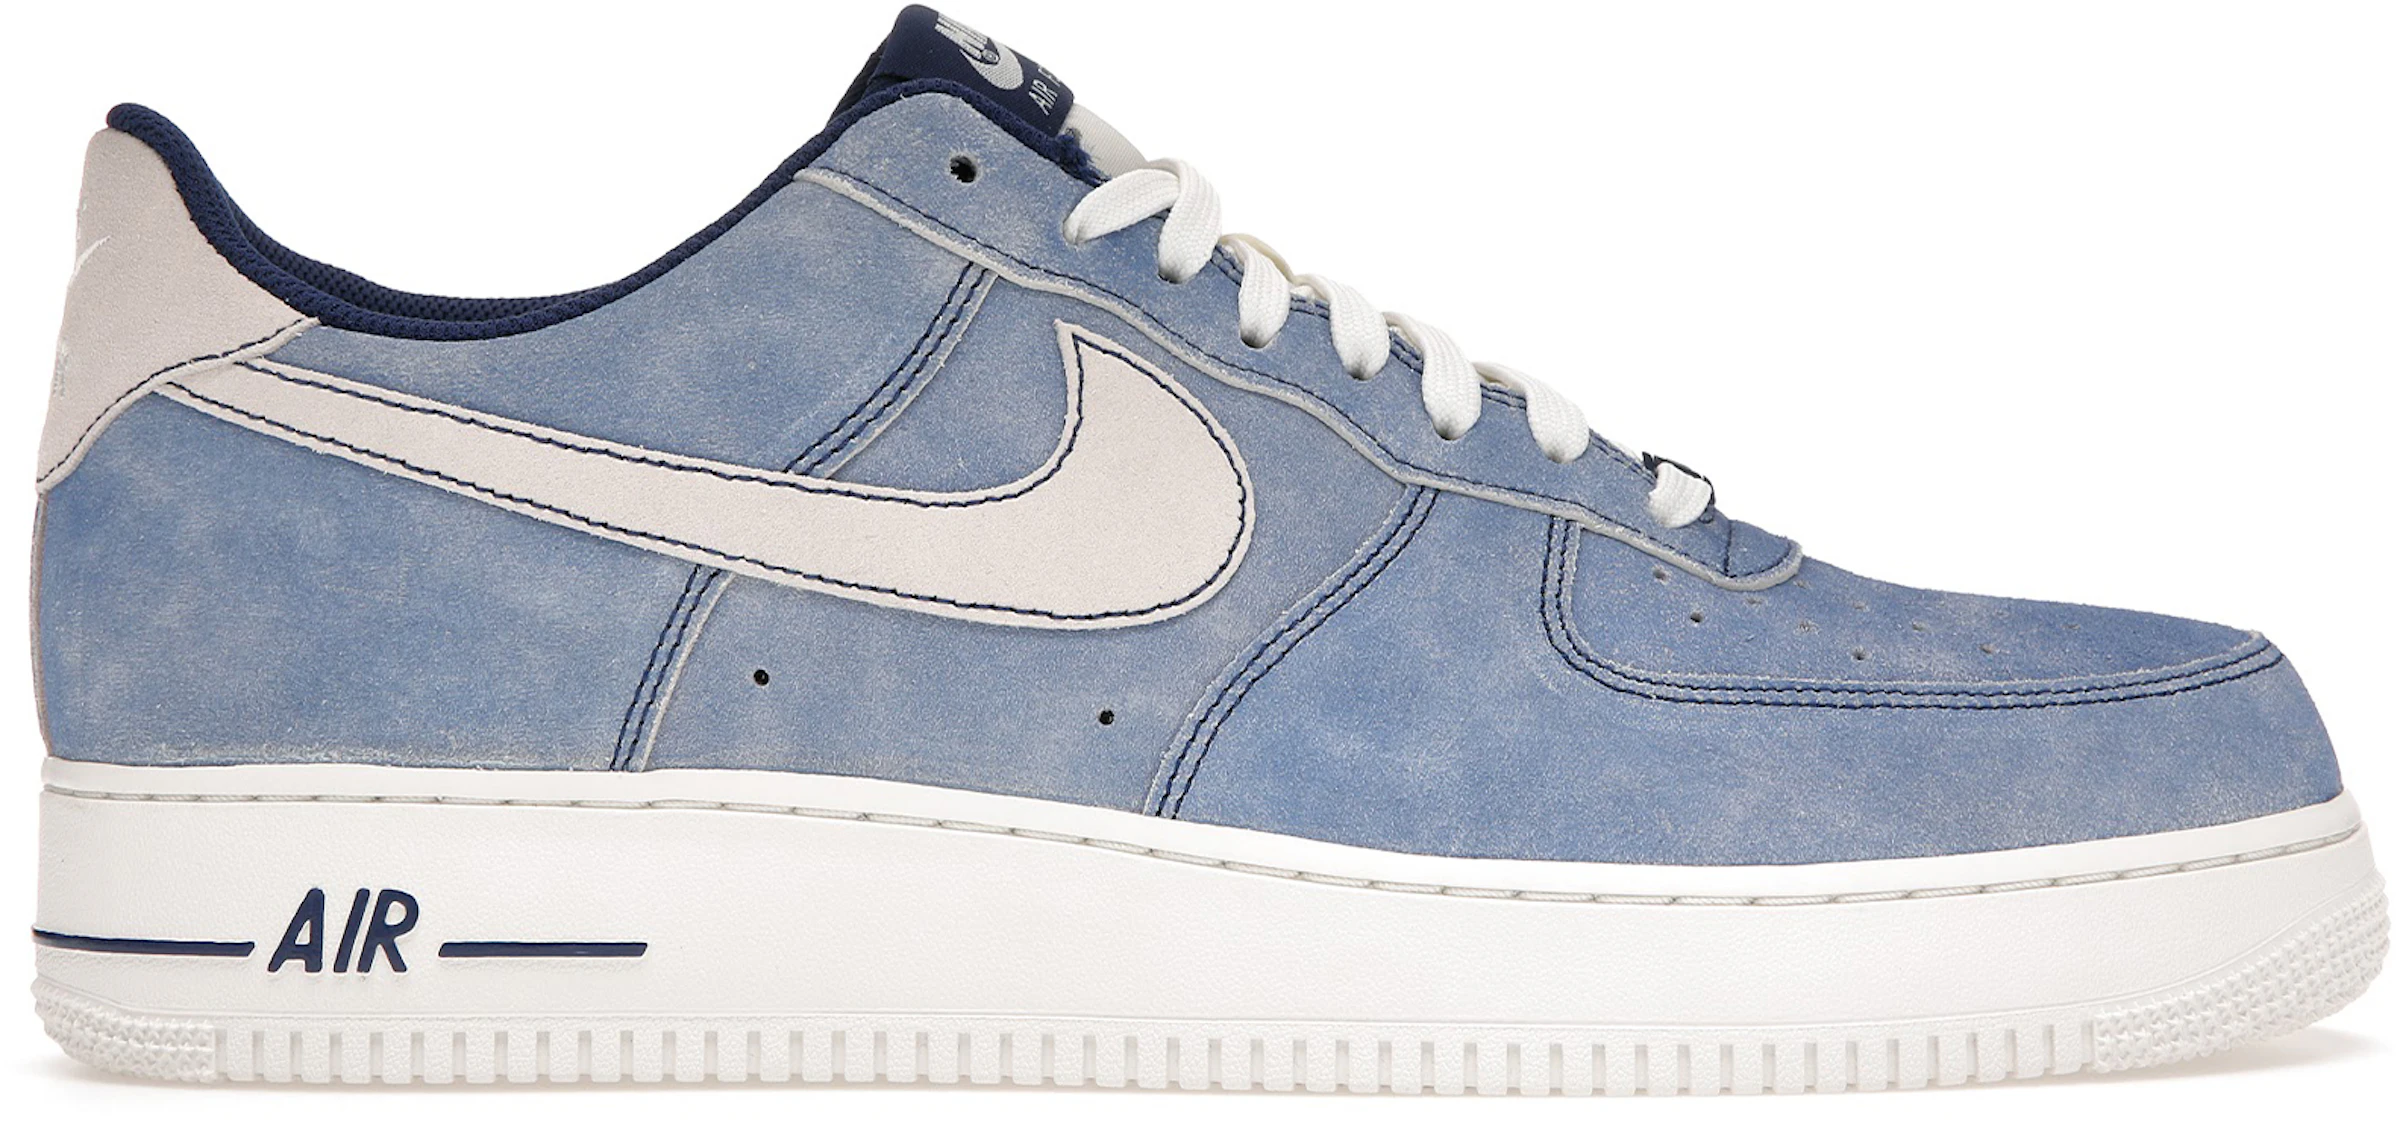 Nike Air Force 1 Low Blue Suede - US